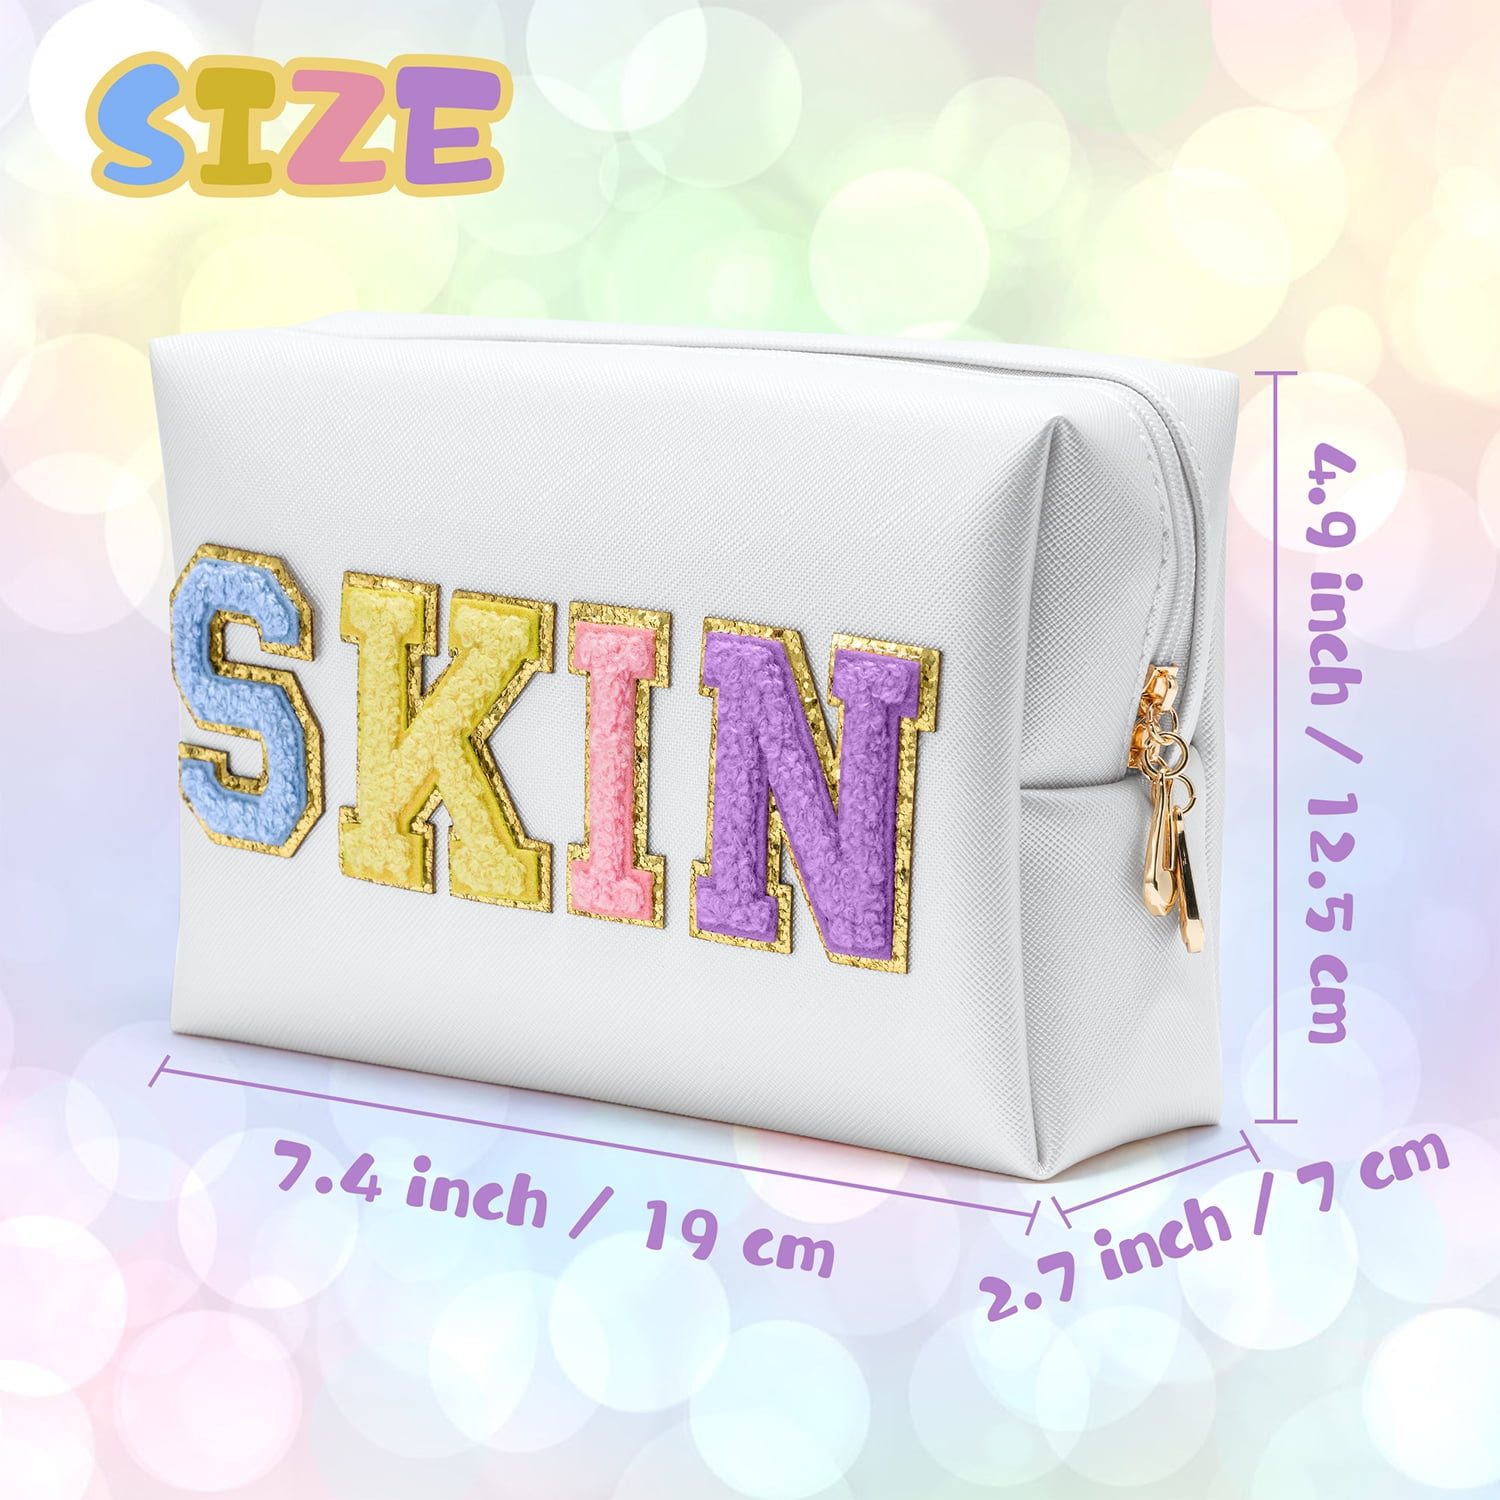 2021 High Quality Cosmetic Pouch Makeup Bags Mini Bag Toiletry Cases Luxury  Clutch Travel Classic Purse PM Size Fashion Crossbody Handbag For Gifts  With Box M47515 From Designer_bags_shop, $36.34